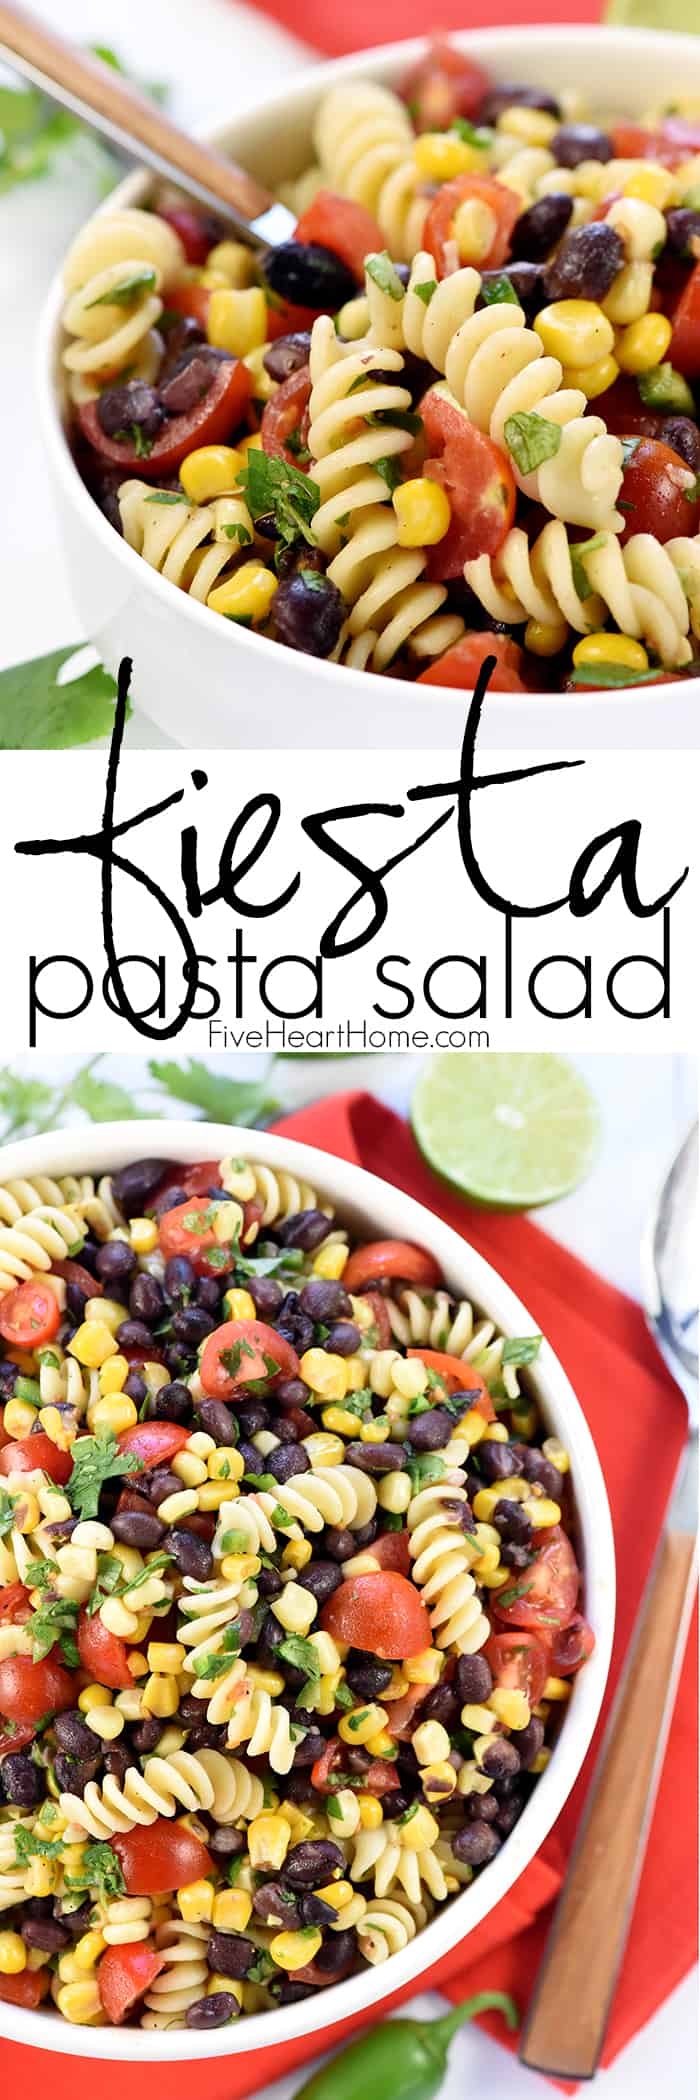 Fiesta Pasta Salad ~ this Mexican pasta salad is loaded with corn, black beans, tomatoes, jalapeño, cilantro, and a fresh lime vinaigrette for a zesty, flavorful, summer side dish! | FiveHeartHome.com via @fivehearthome